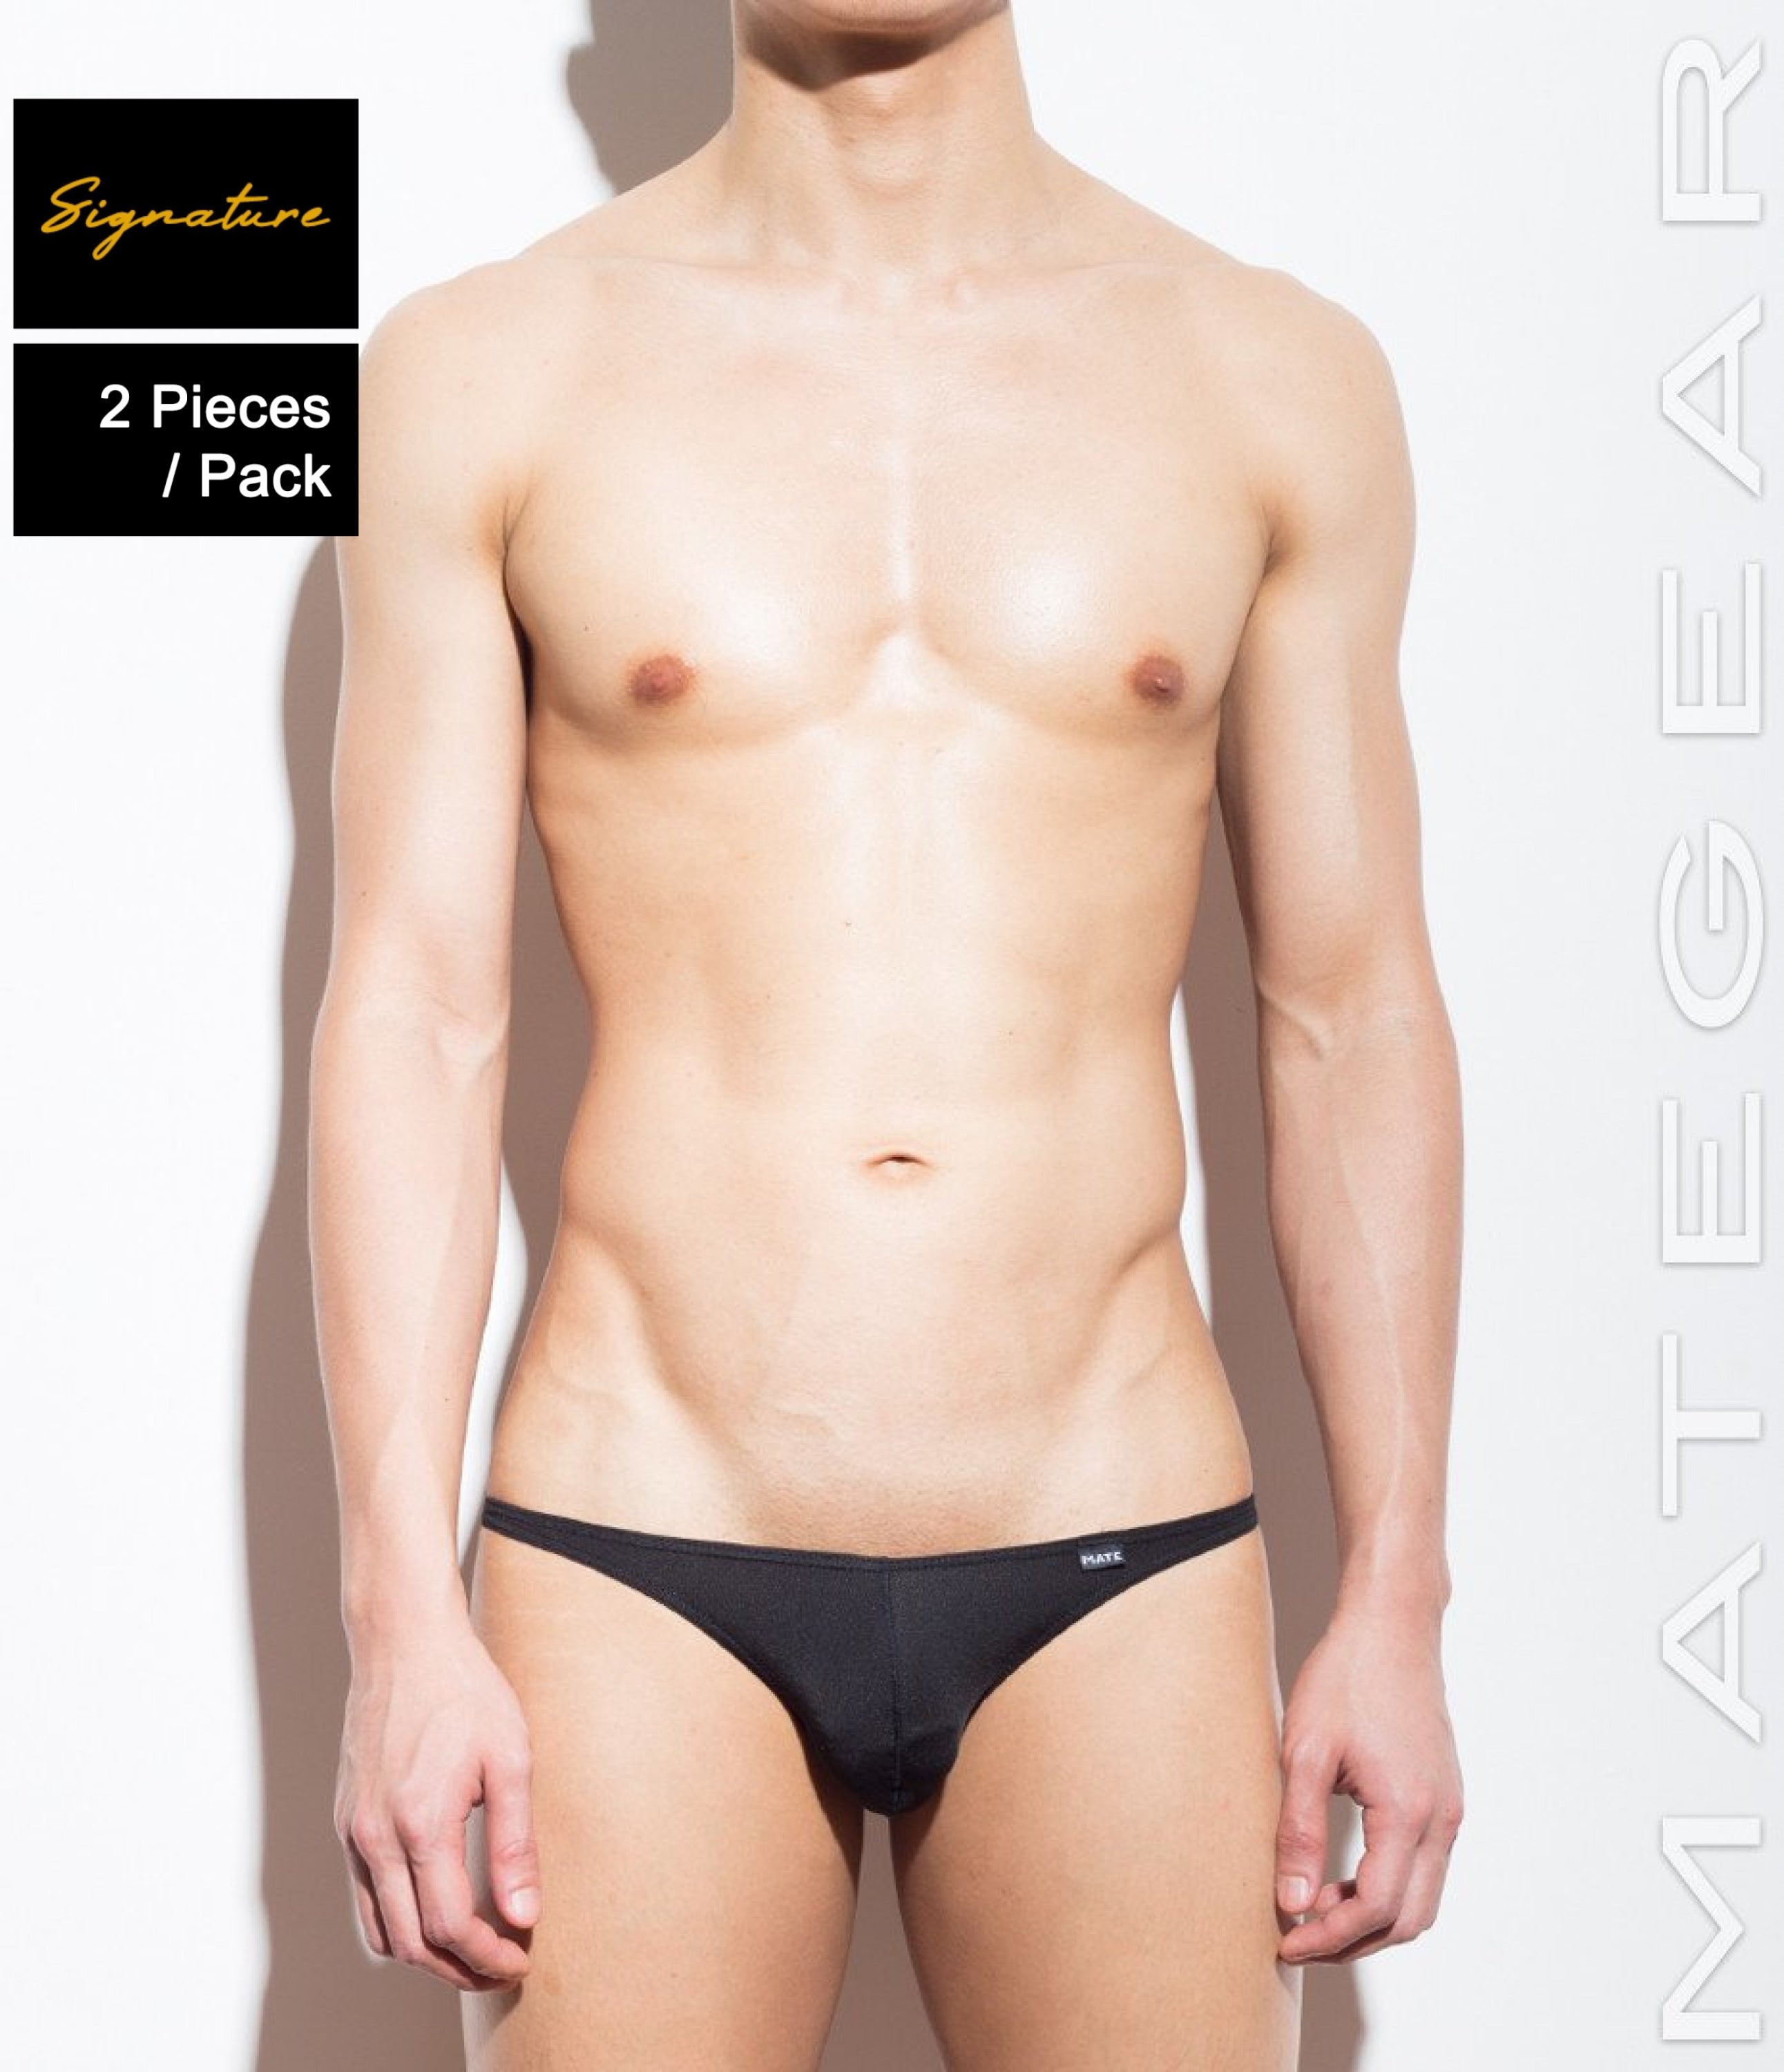 Mens Sexy Underwear: Underwear For Men Provides Functionality and